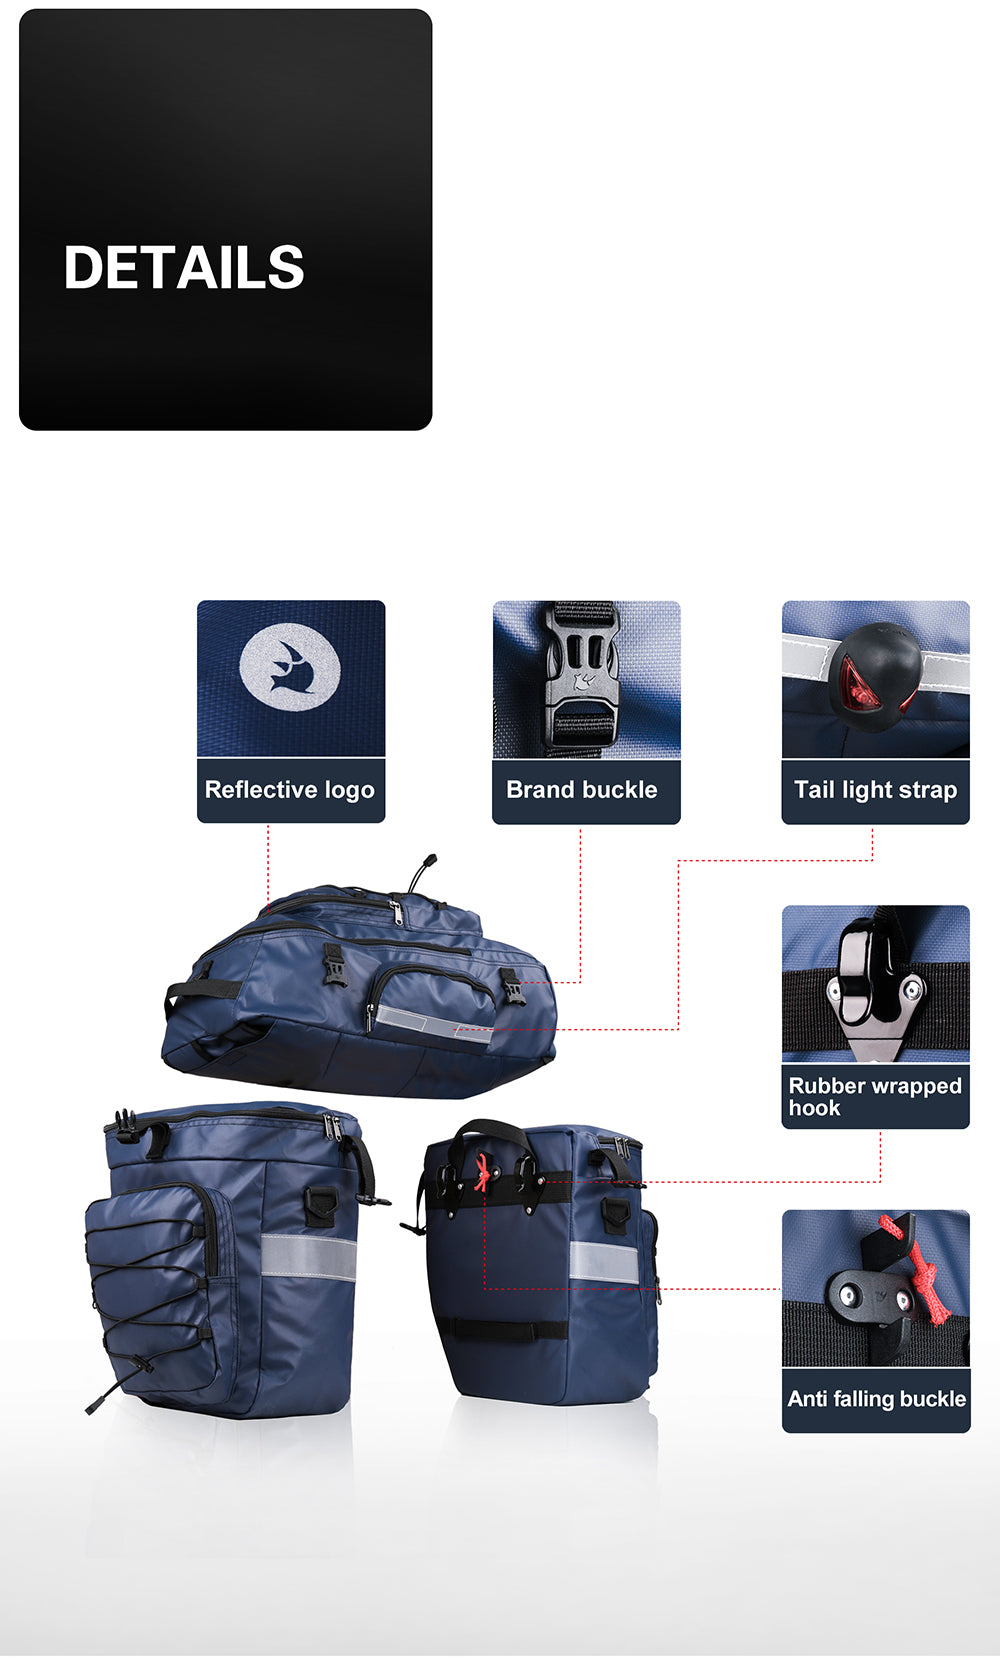 3 in 1 Multifuction Bicycle Pannier Bicycle Cargo Bag